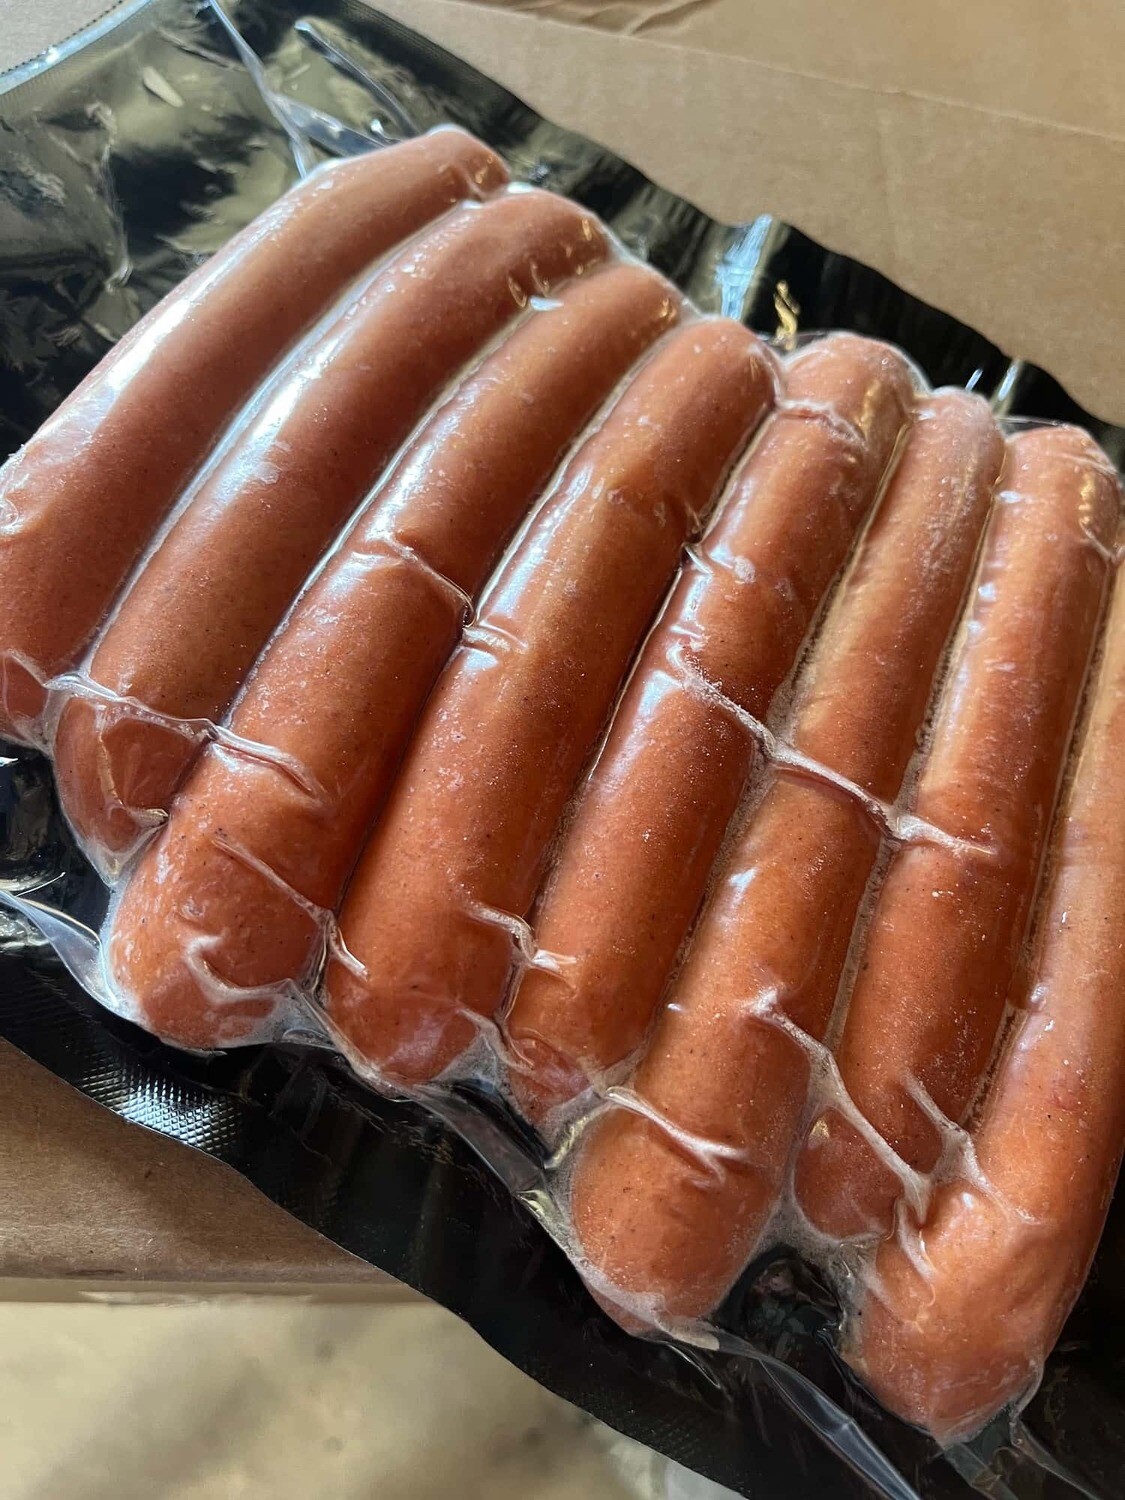 Uncured Hotdogs - No Nitrates or Nitrites - Not Preserved